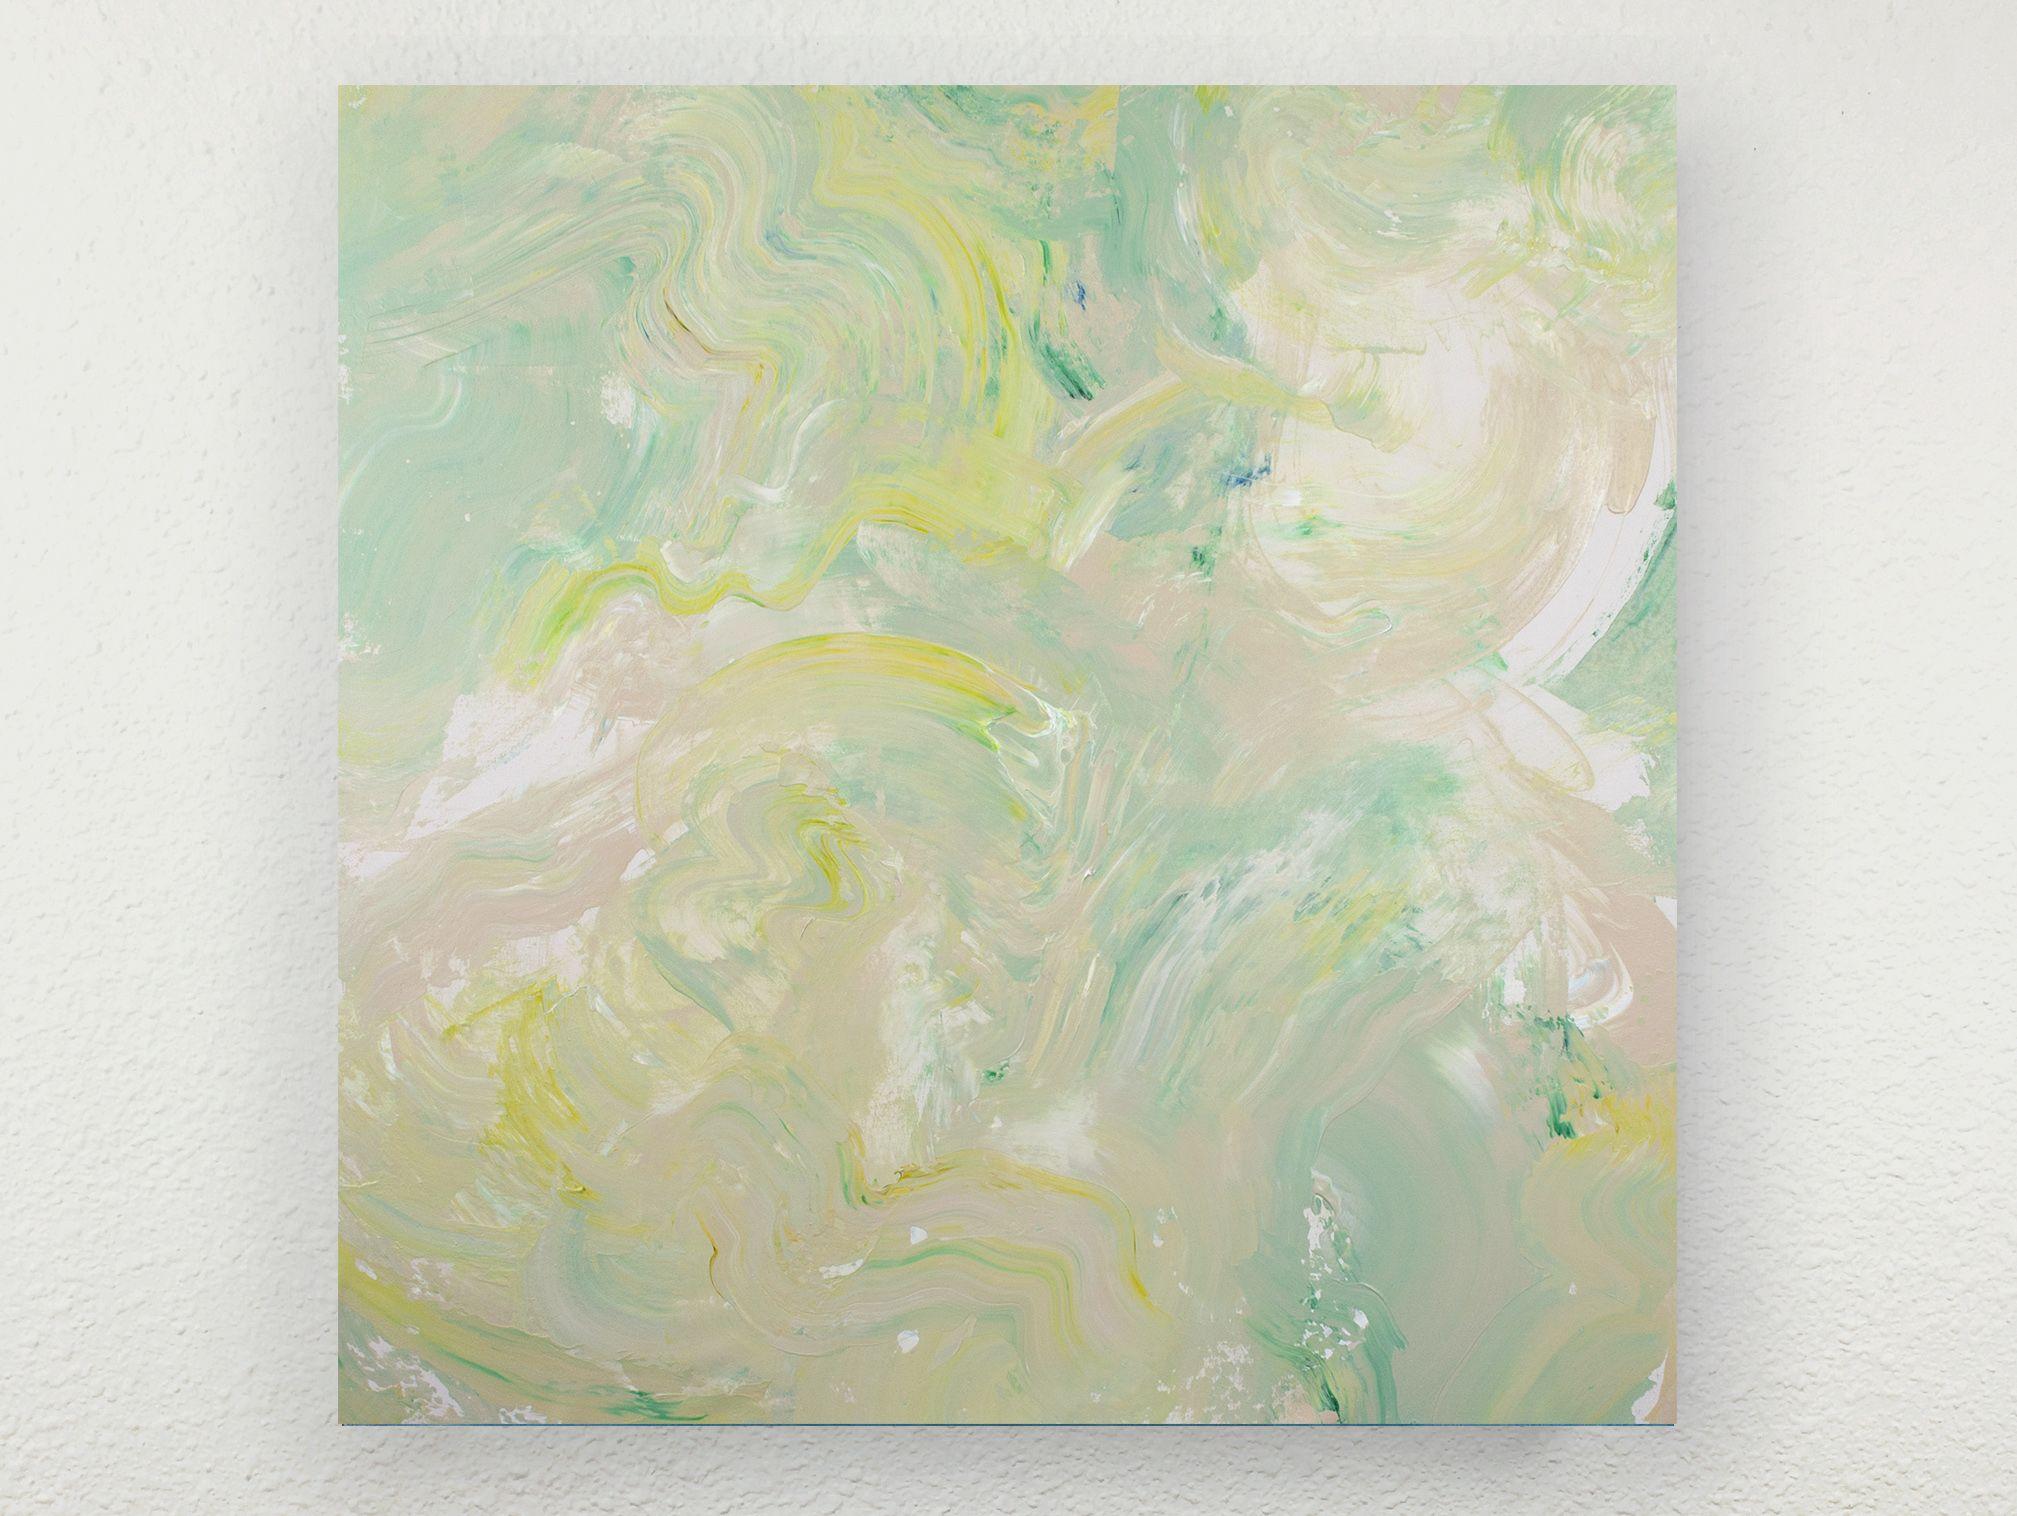 Green Flow 200824, green abstract expressionist.  Measures 40x40 inches, acrylics on canvas.  Ships rolled on a tube.    